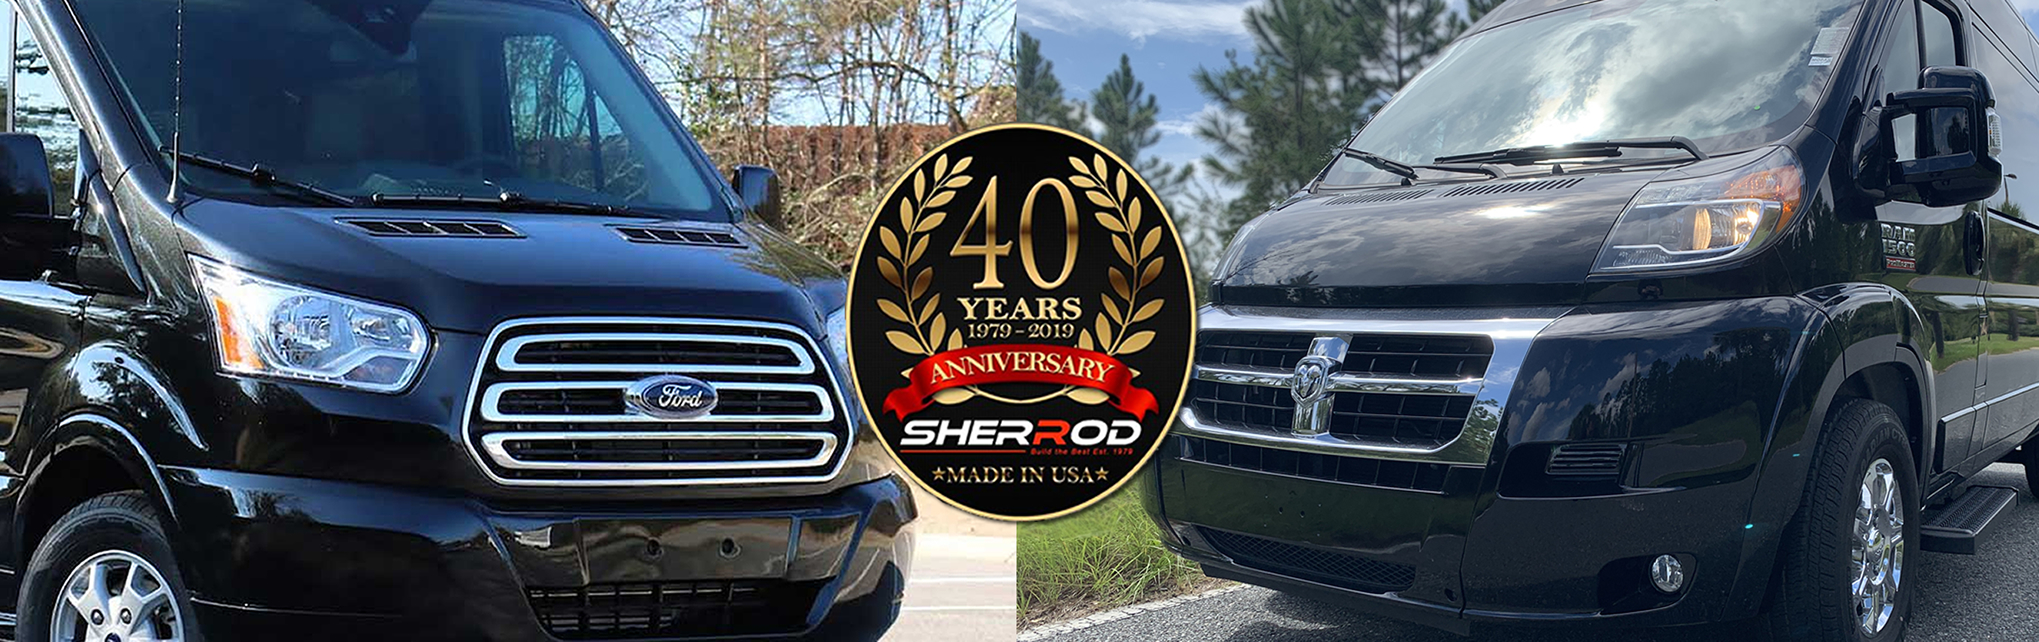 Customized by Sherrod Customs – For the Quality and Comfort with Over 40 Years Experience (800) 824-6333